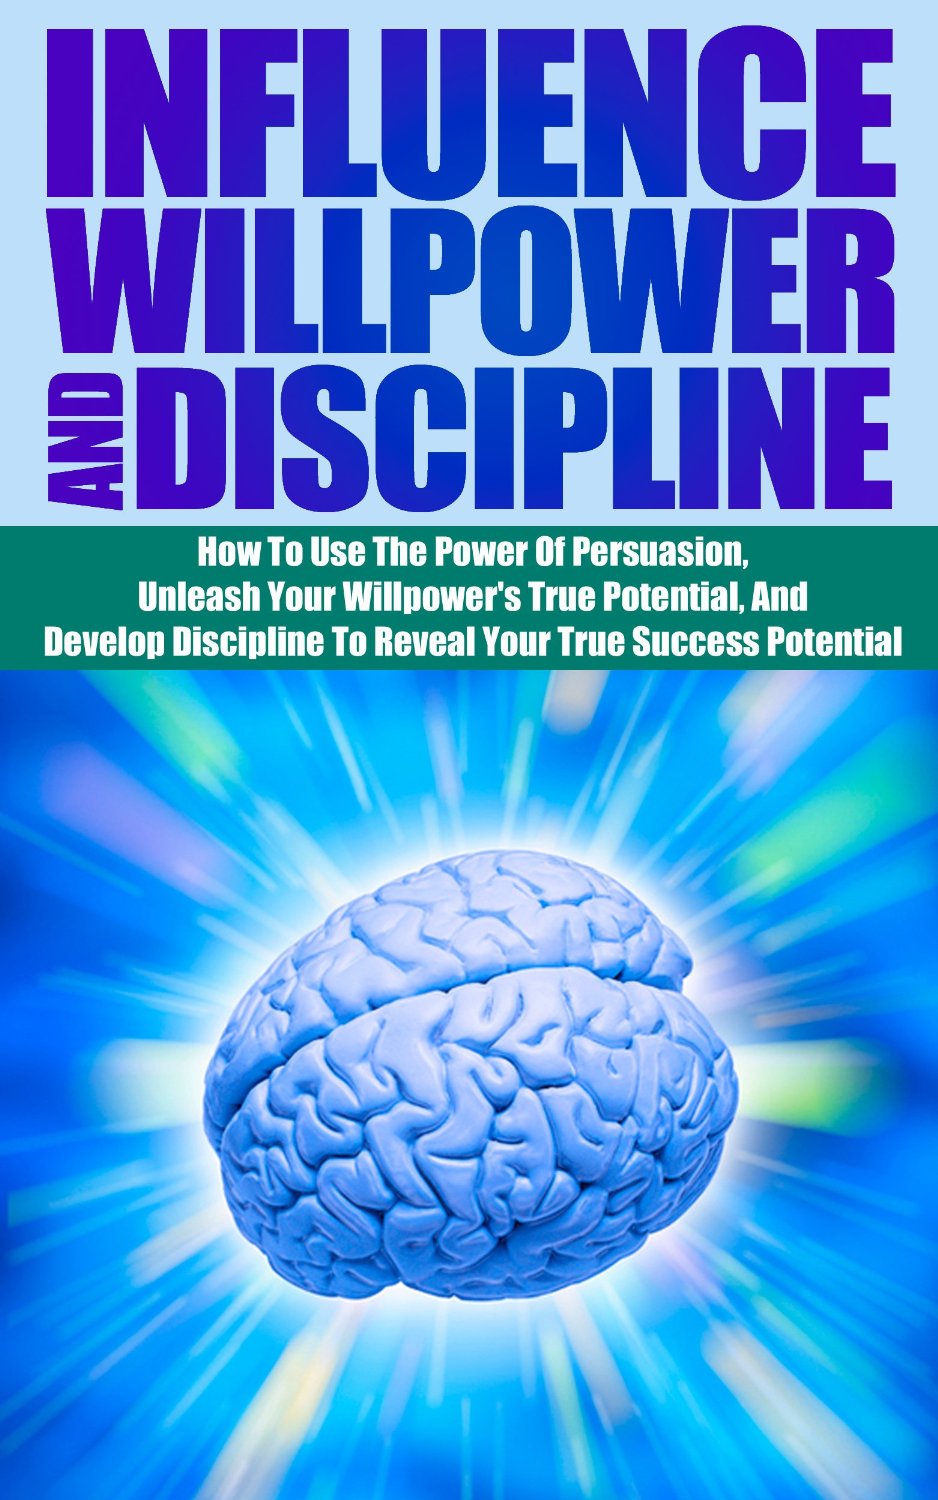 Influence Willpower And Discipline by Ace McCloud